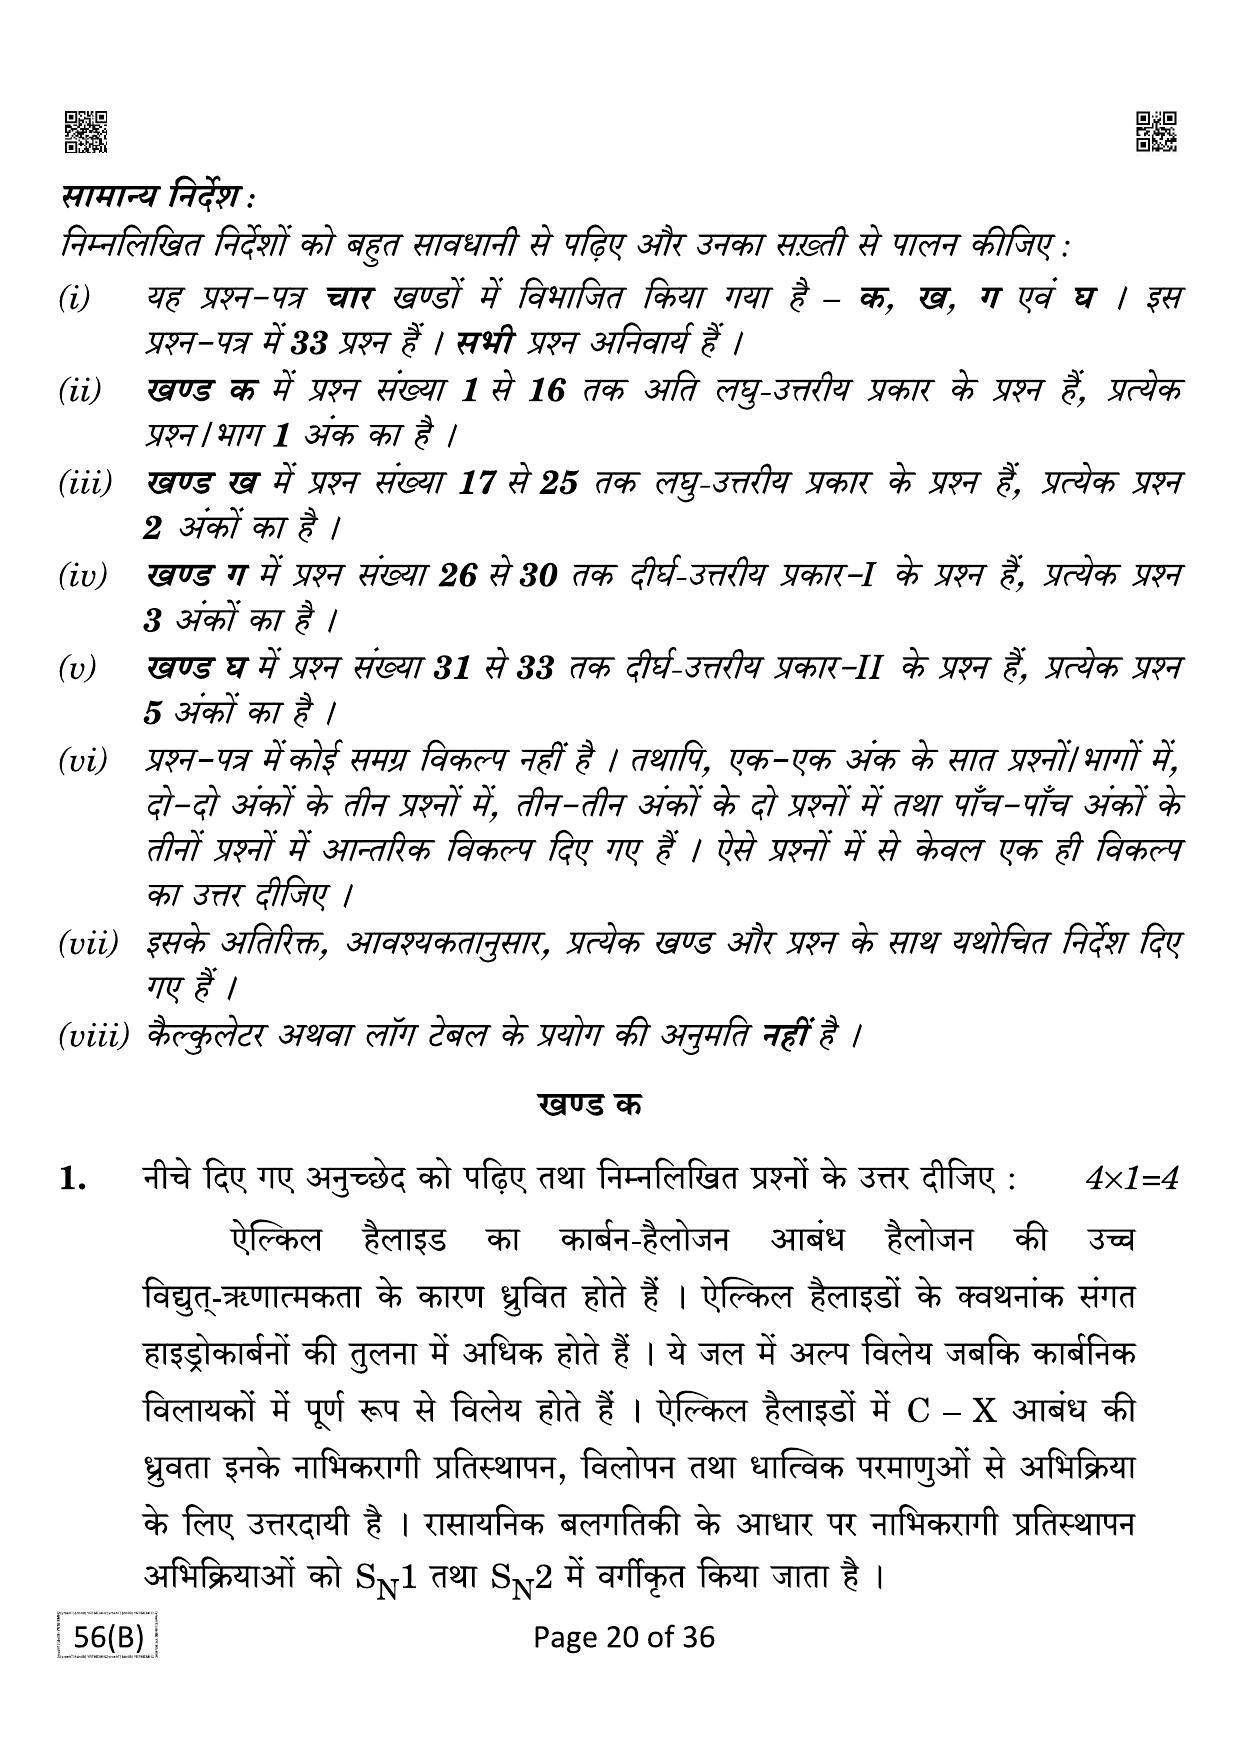 CBSE Class 12 QP_043_CHEMISTRY_FOR_BLIND_CANDIDATES 2021 Compartment Question Paper - Page 20